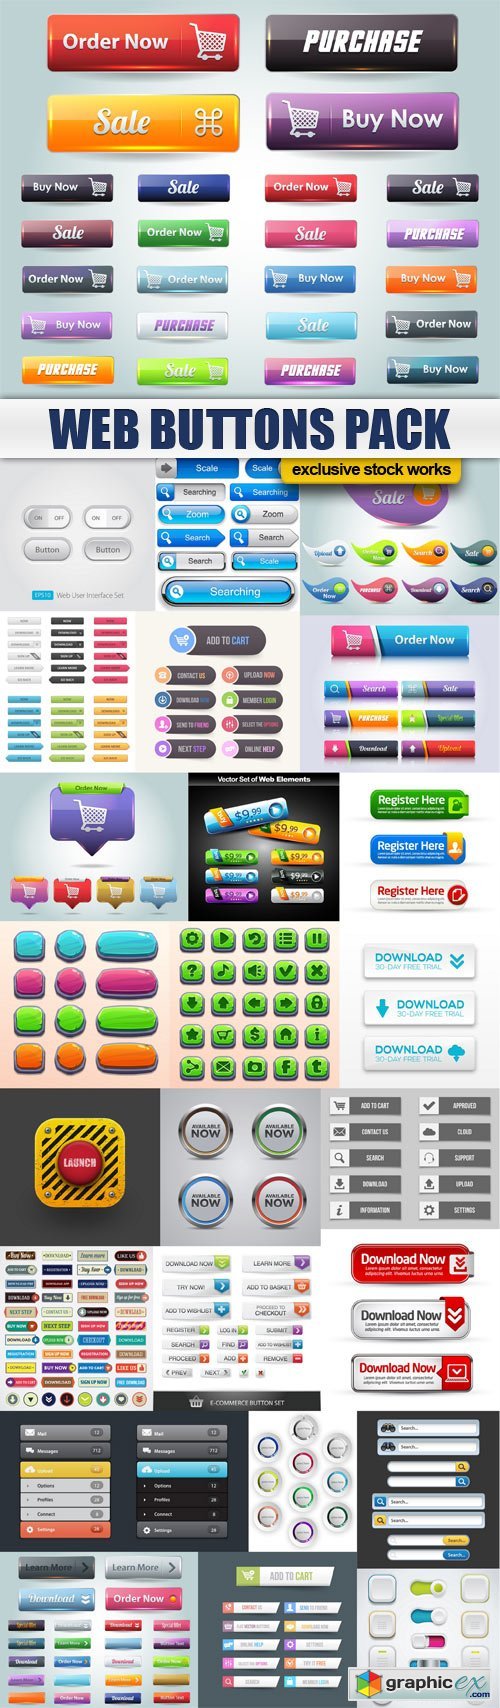  Web Buttons Pack - 25x EPS 